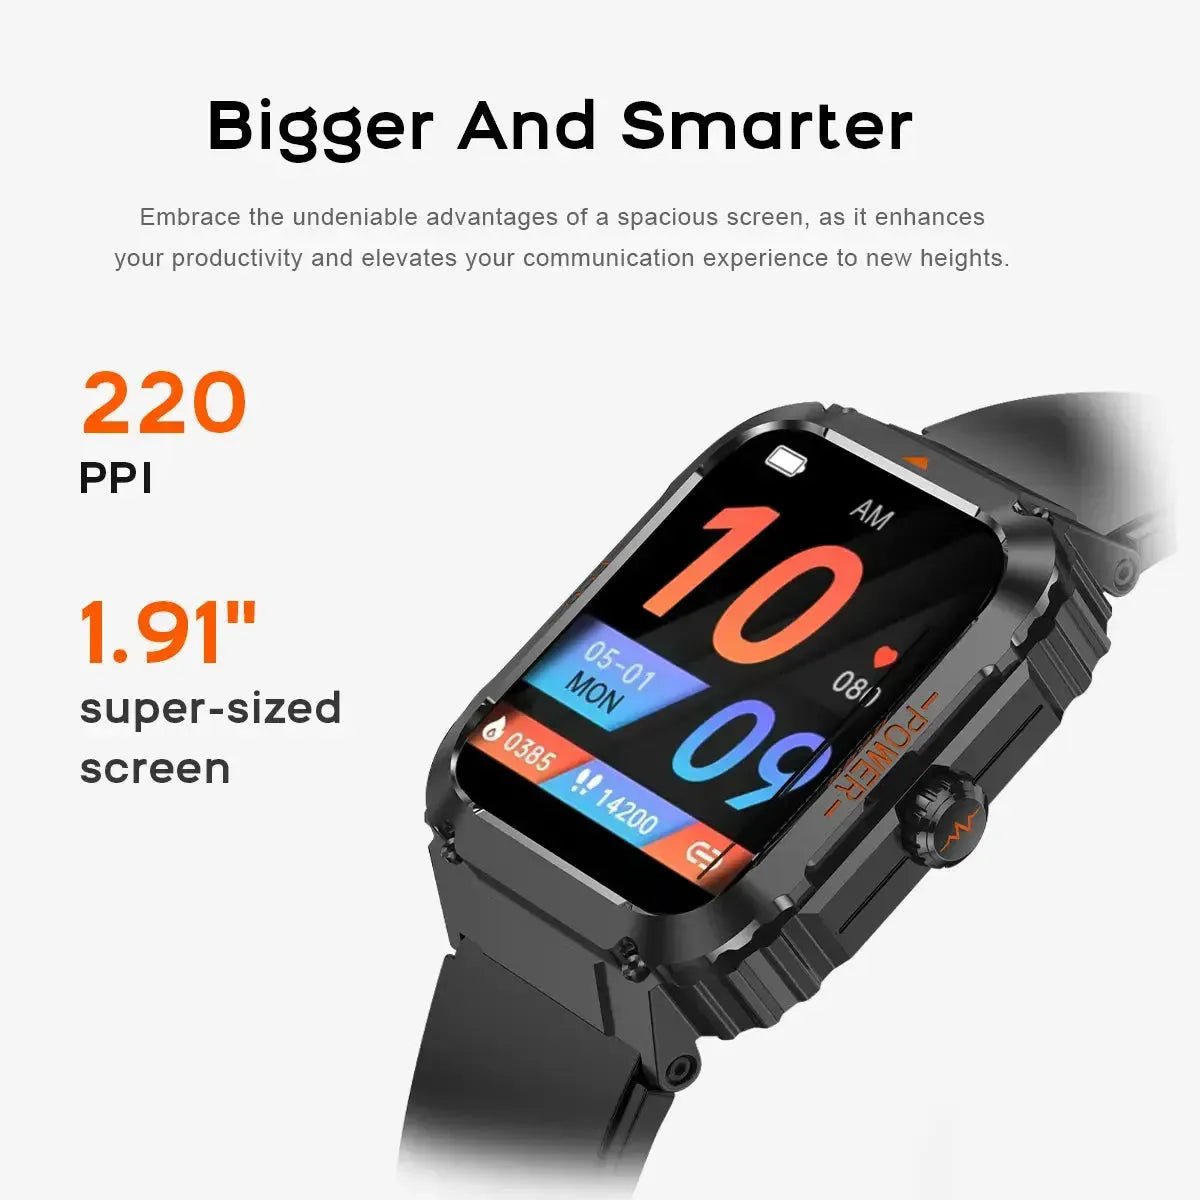 Tousains smartwatch S1 with bigger screen